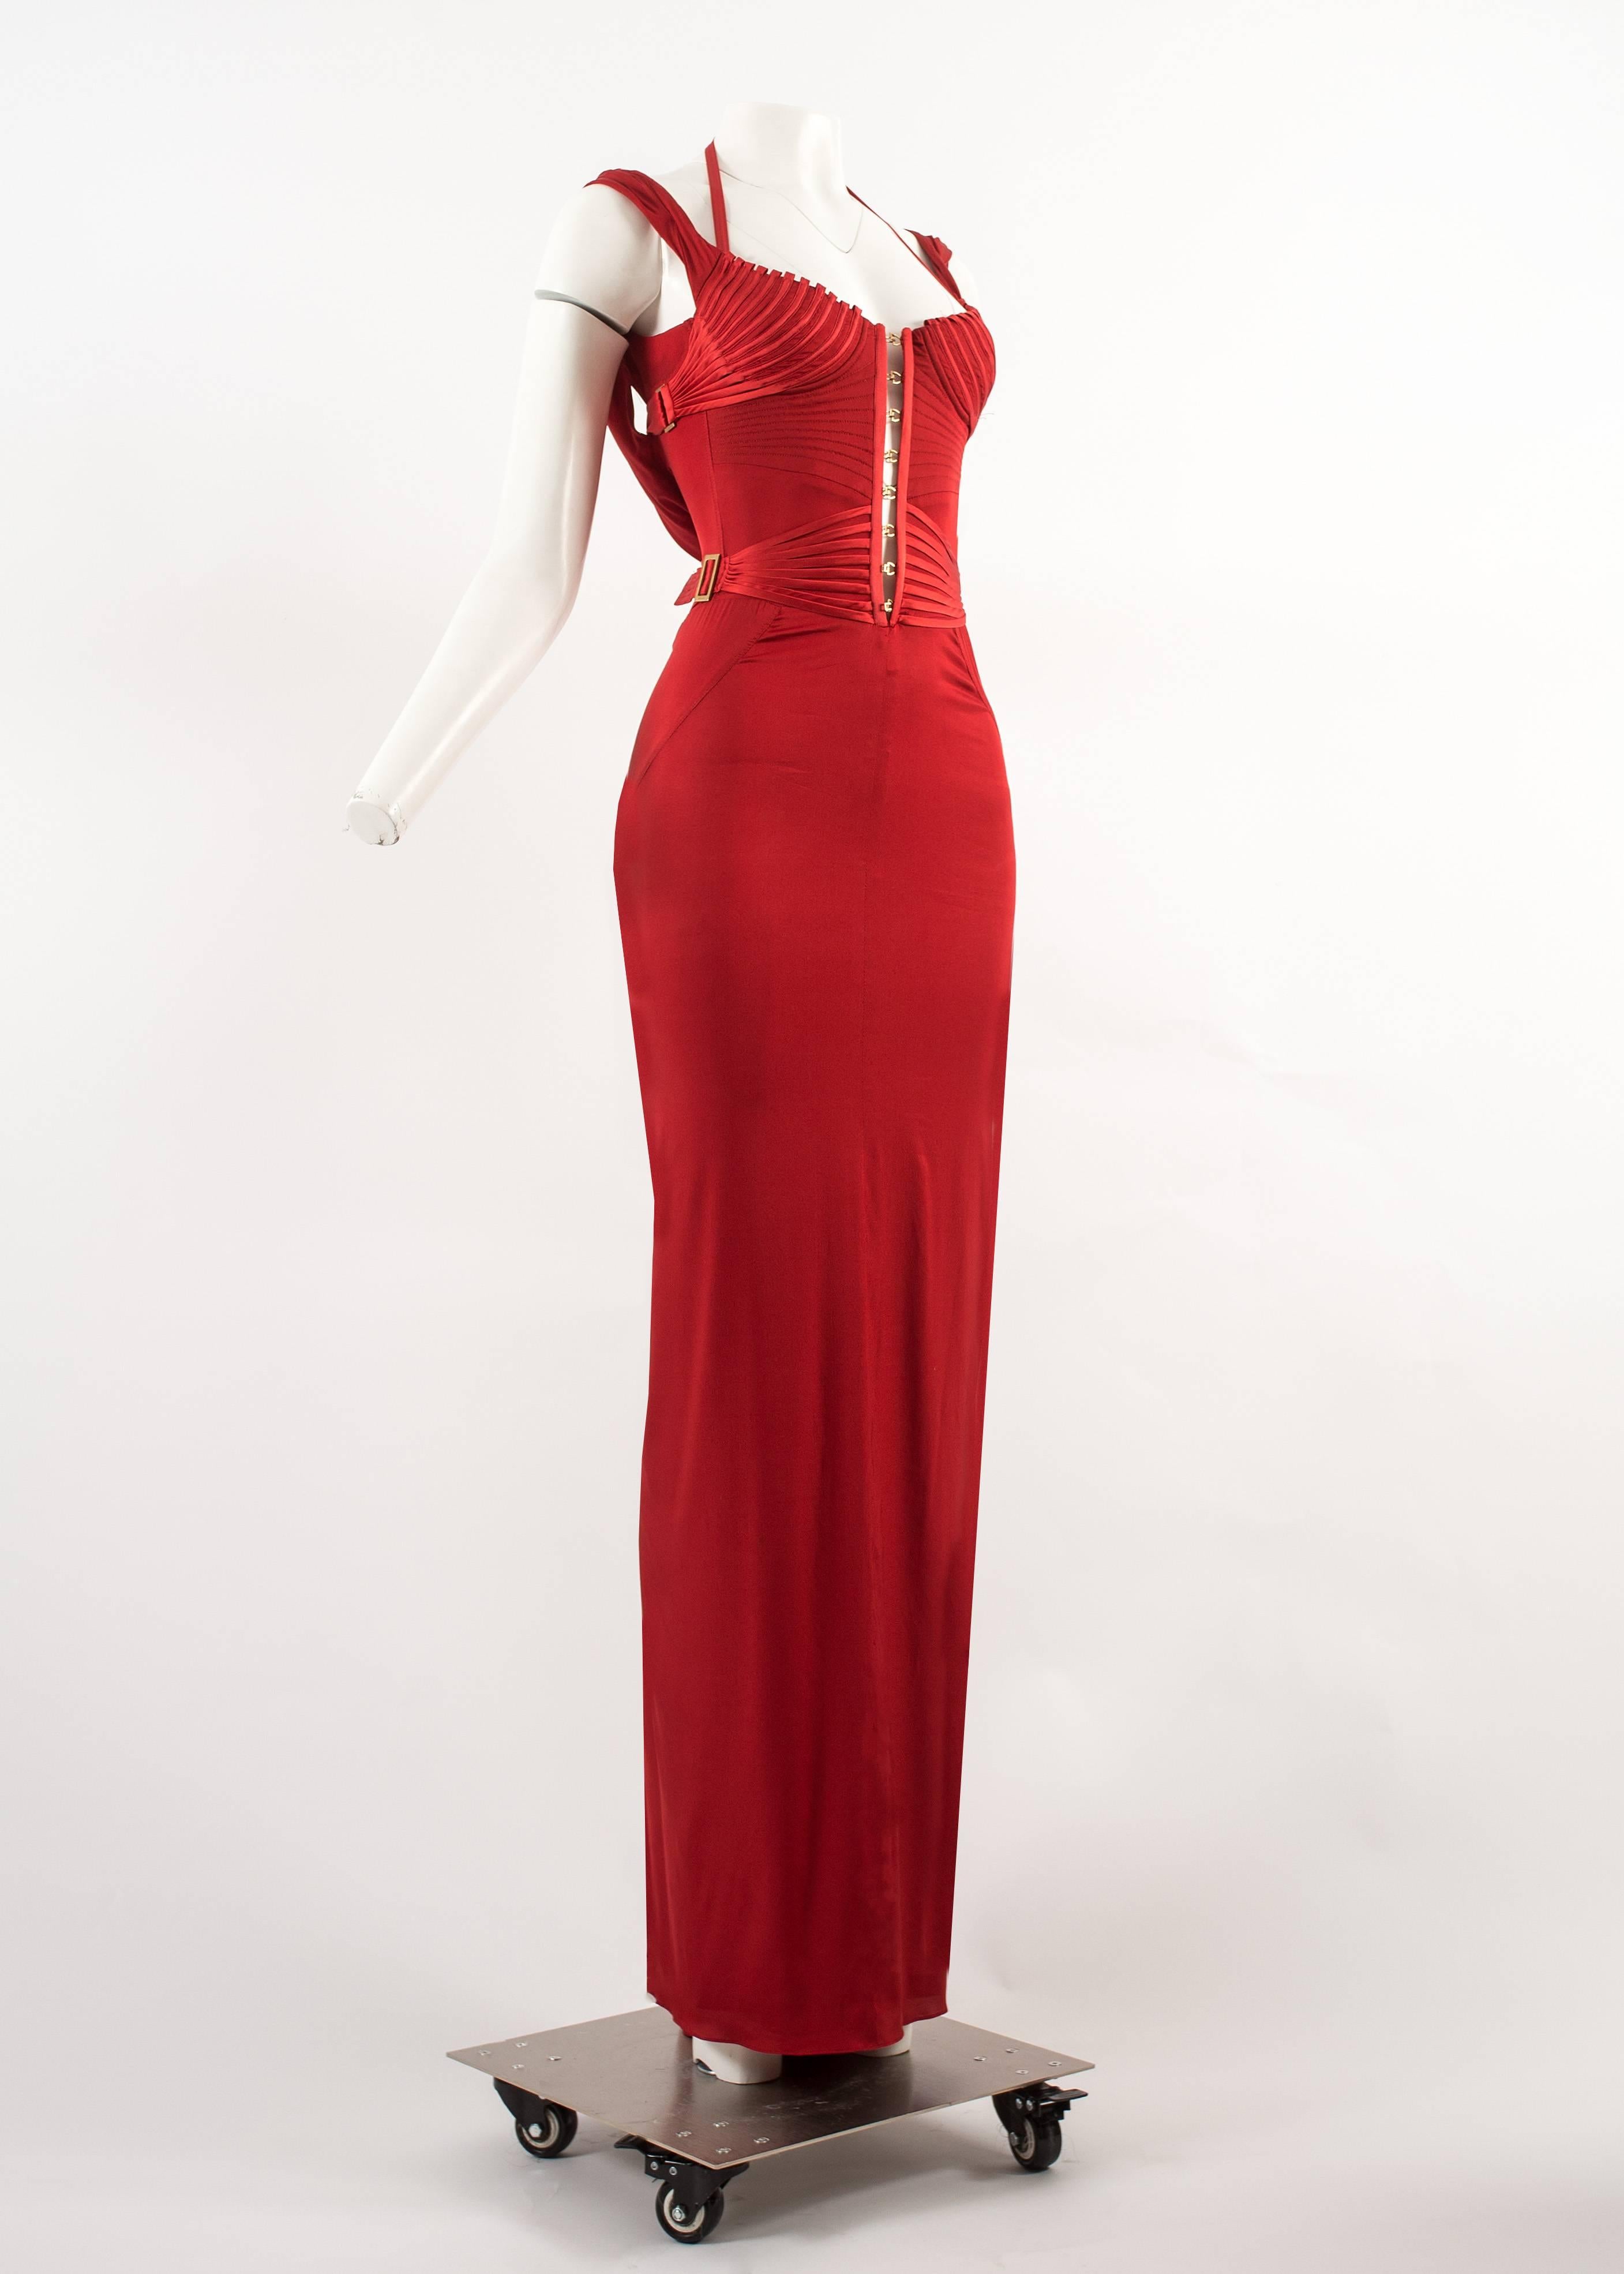 Tom Ford for Gucci Autumn-Winter 2003 red corseted evening gown 

- red silk spandex
- boned bodice 
- metal hook and bar closures 
- zip fastening at rear
- halter neck strap 
- It 40 / Fr 36 / UK 8 